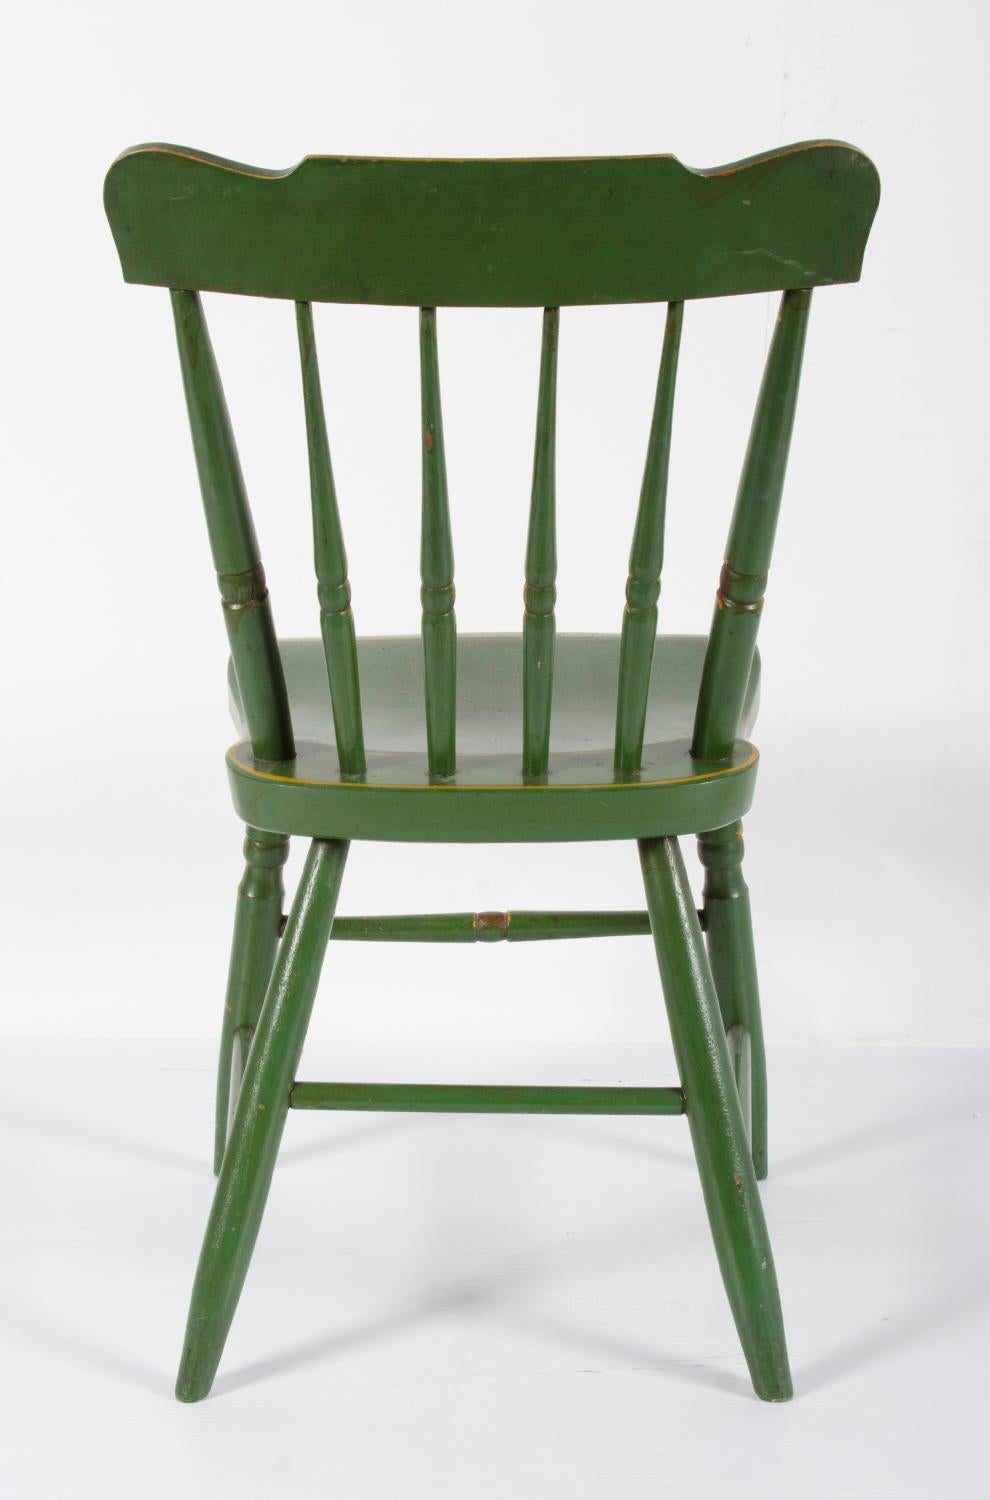 American Set of 6 Green Plank-Seaded Spindle-Back Chairs with Rose Decoration